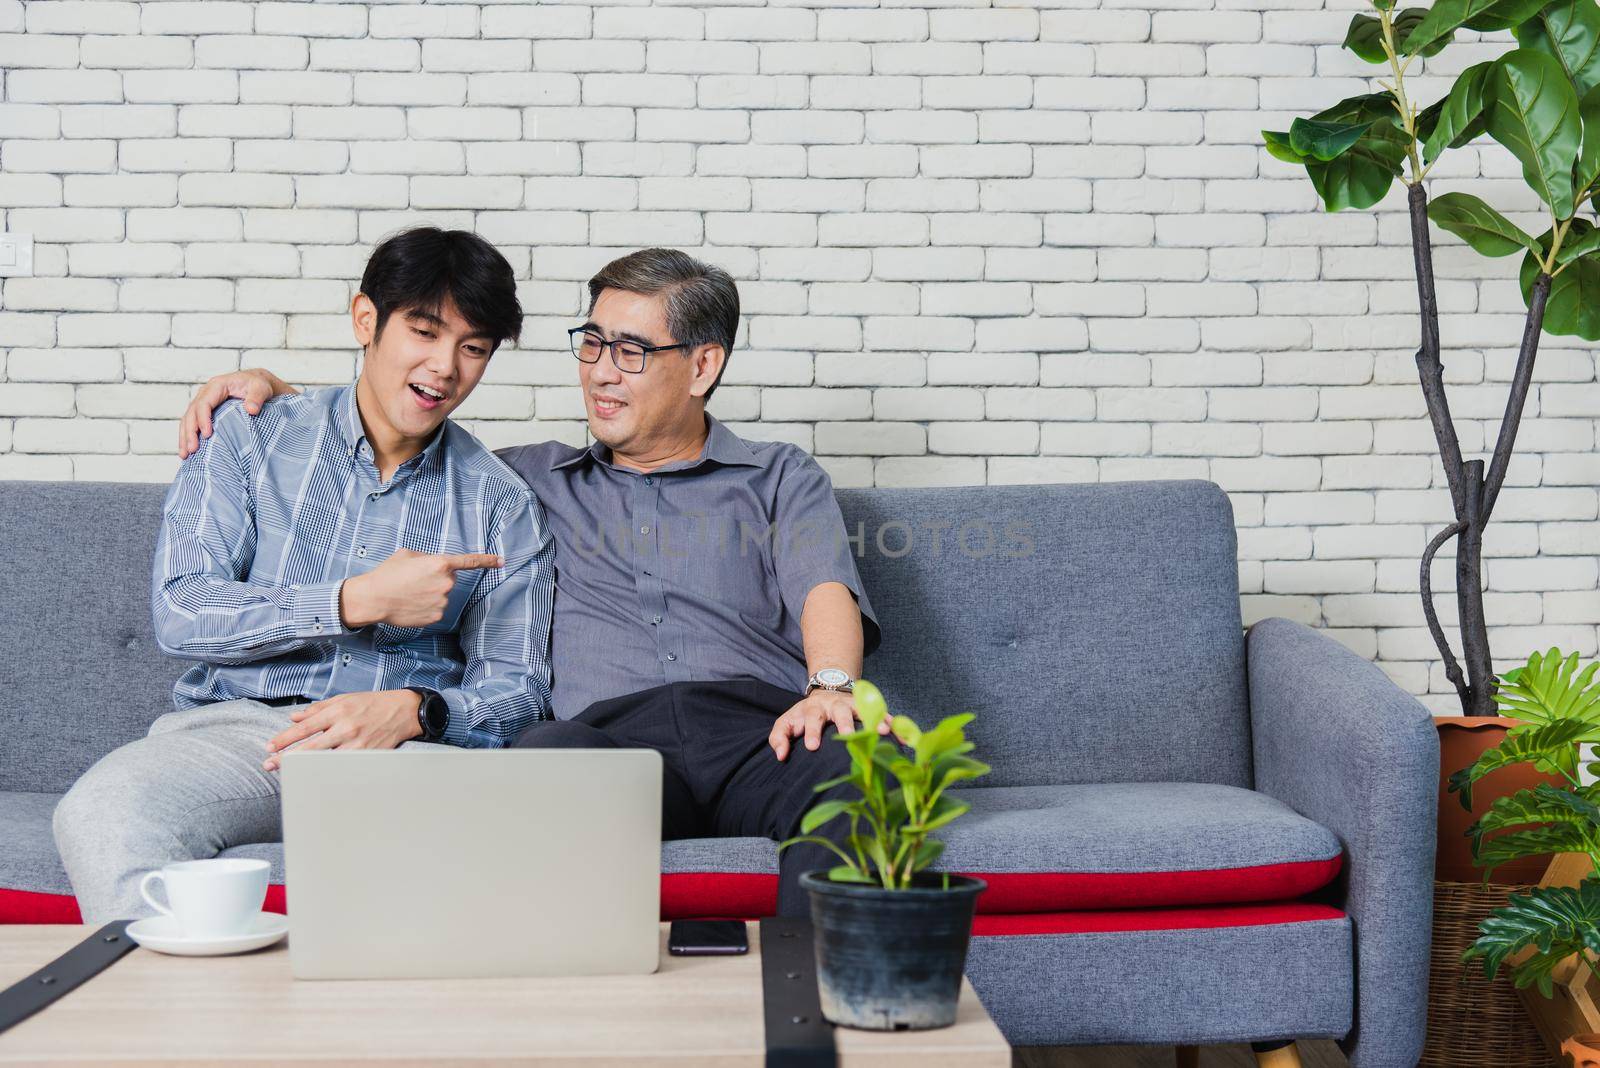 Asian senior businessman with laptop computer discuss together with young team in office. Father man and his son sit on sofa talking chatting on video call conference on laptop in living room at home